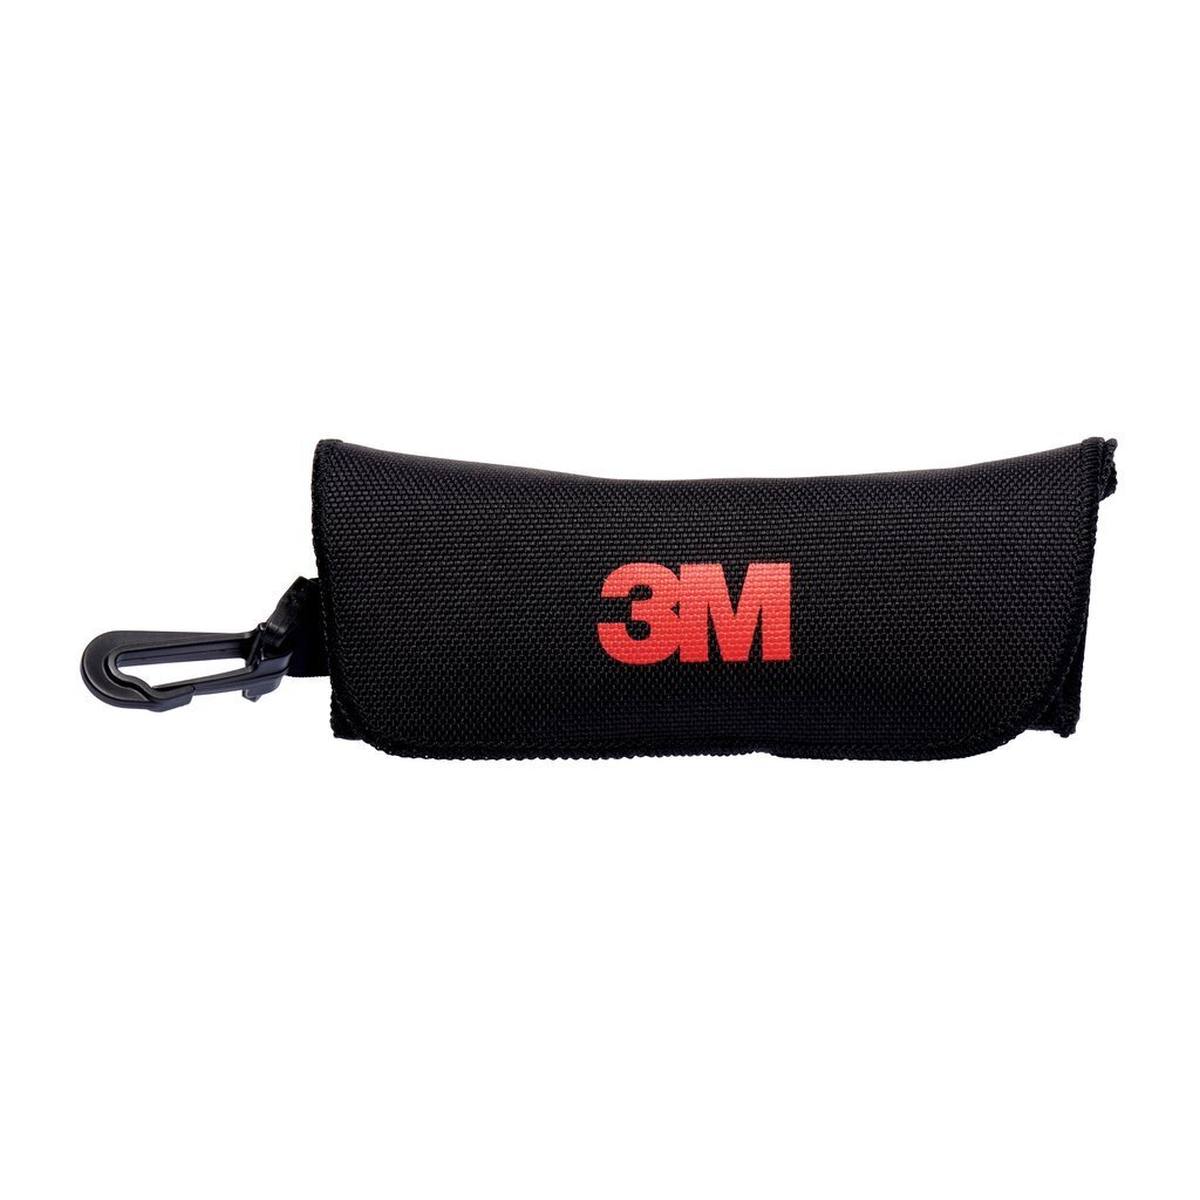 3M Medium-strength spectacle case with strap for belt, black, case4